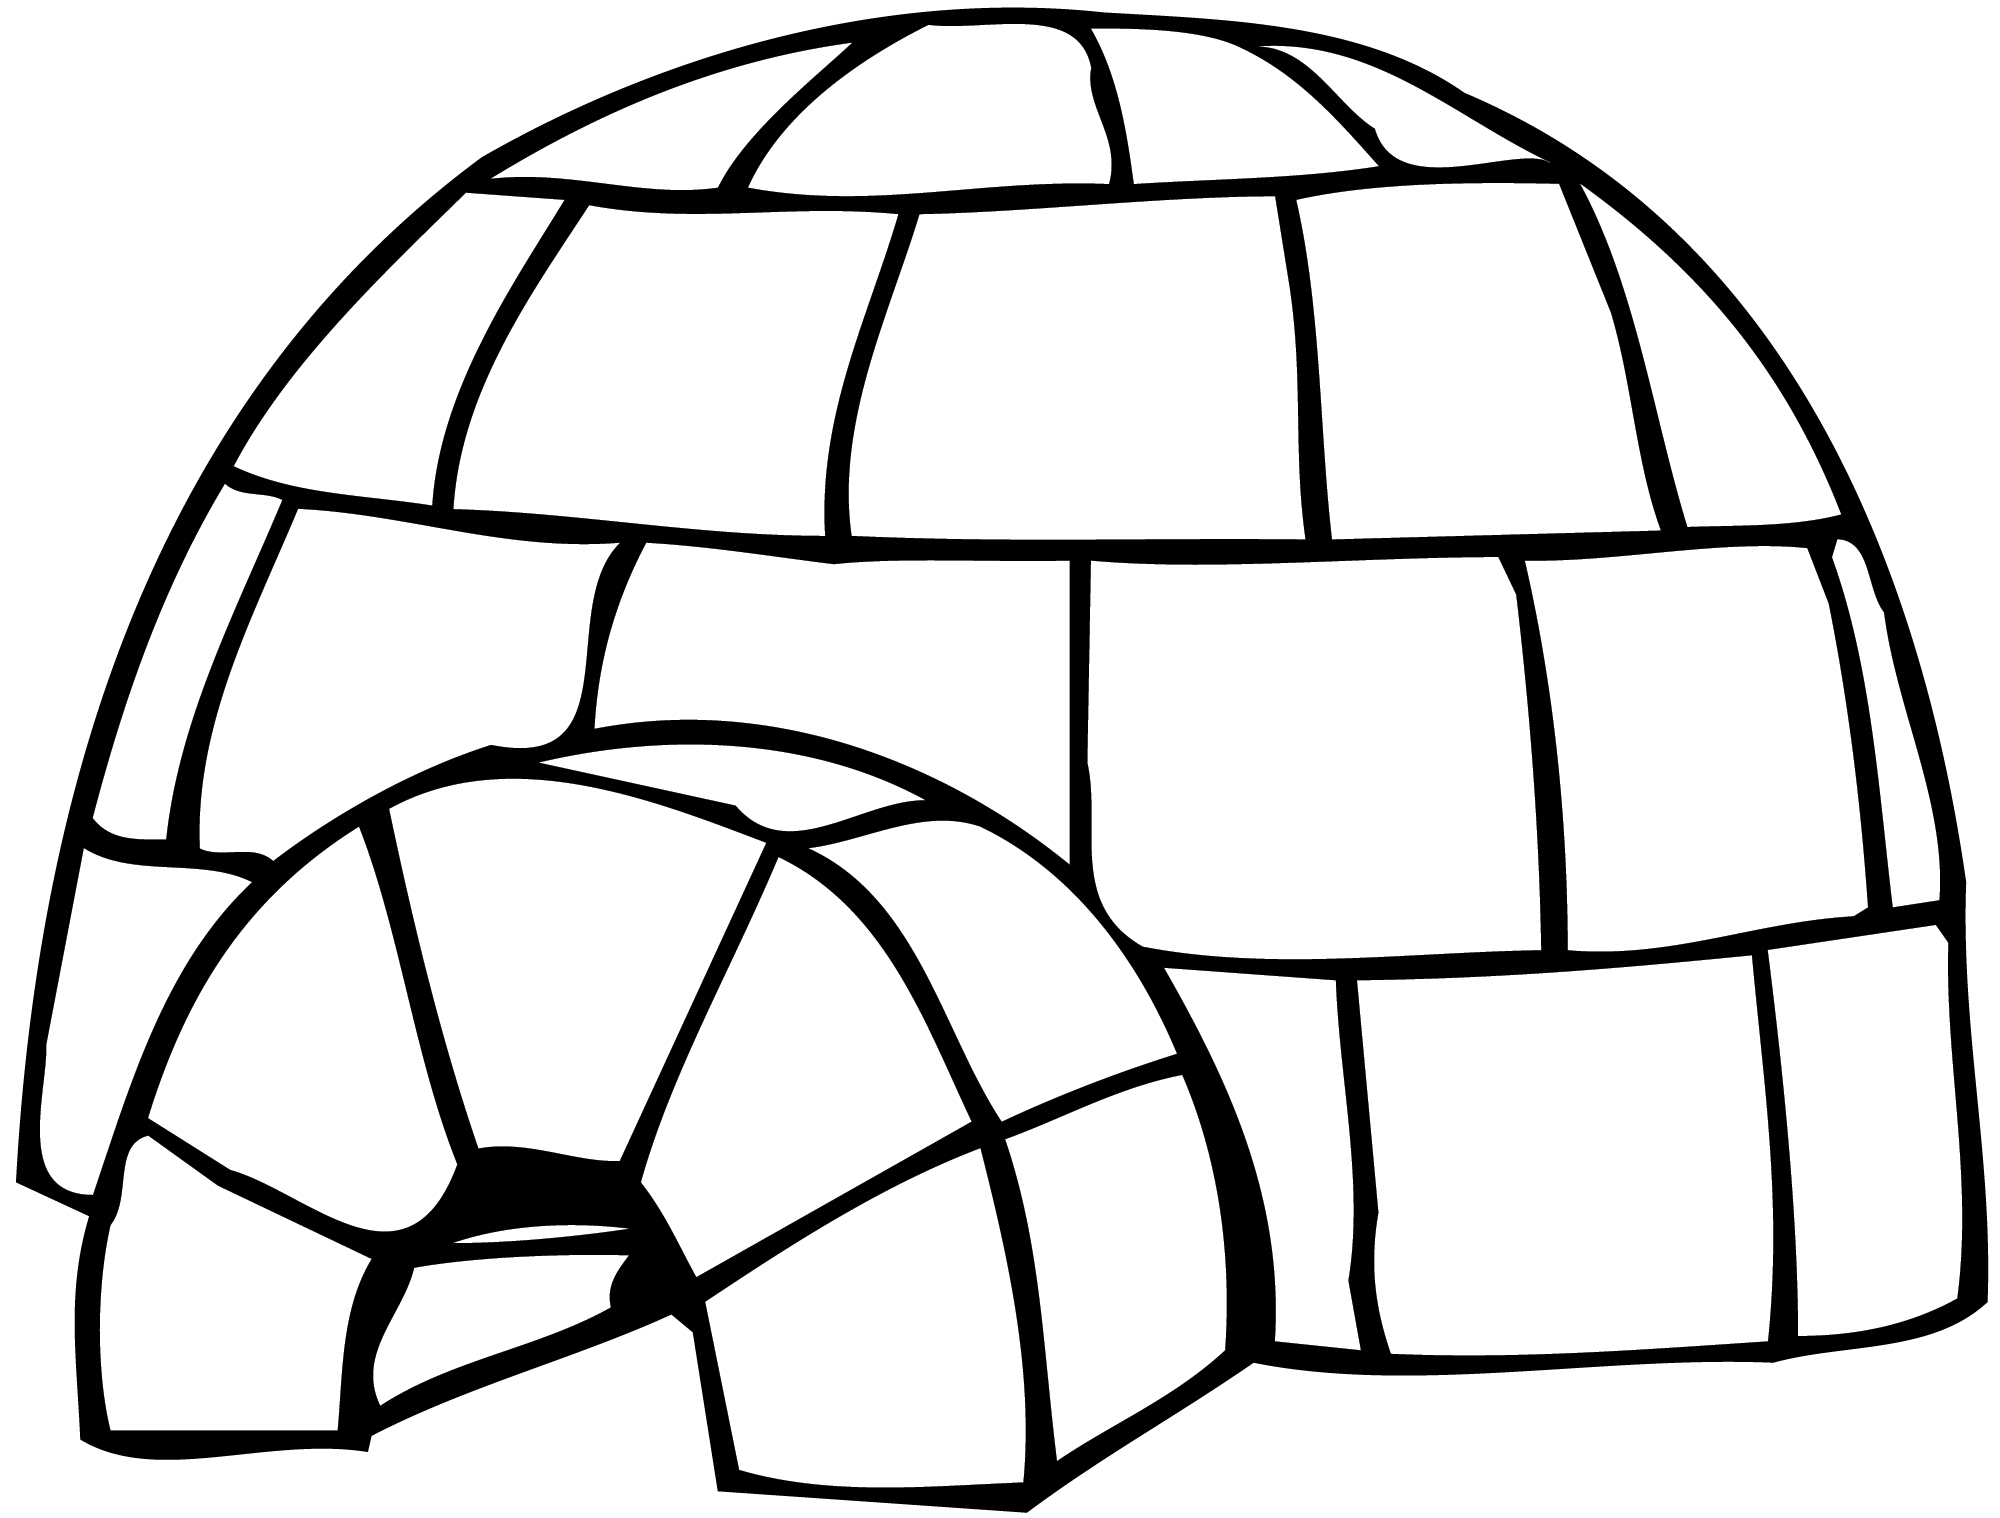 Igloo Clipart Black And White | Clipart Panda - Free Clipart Images